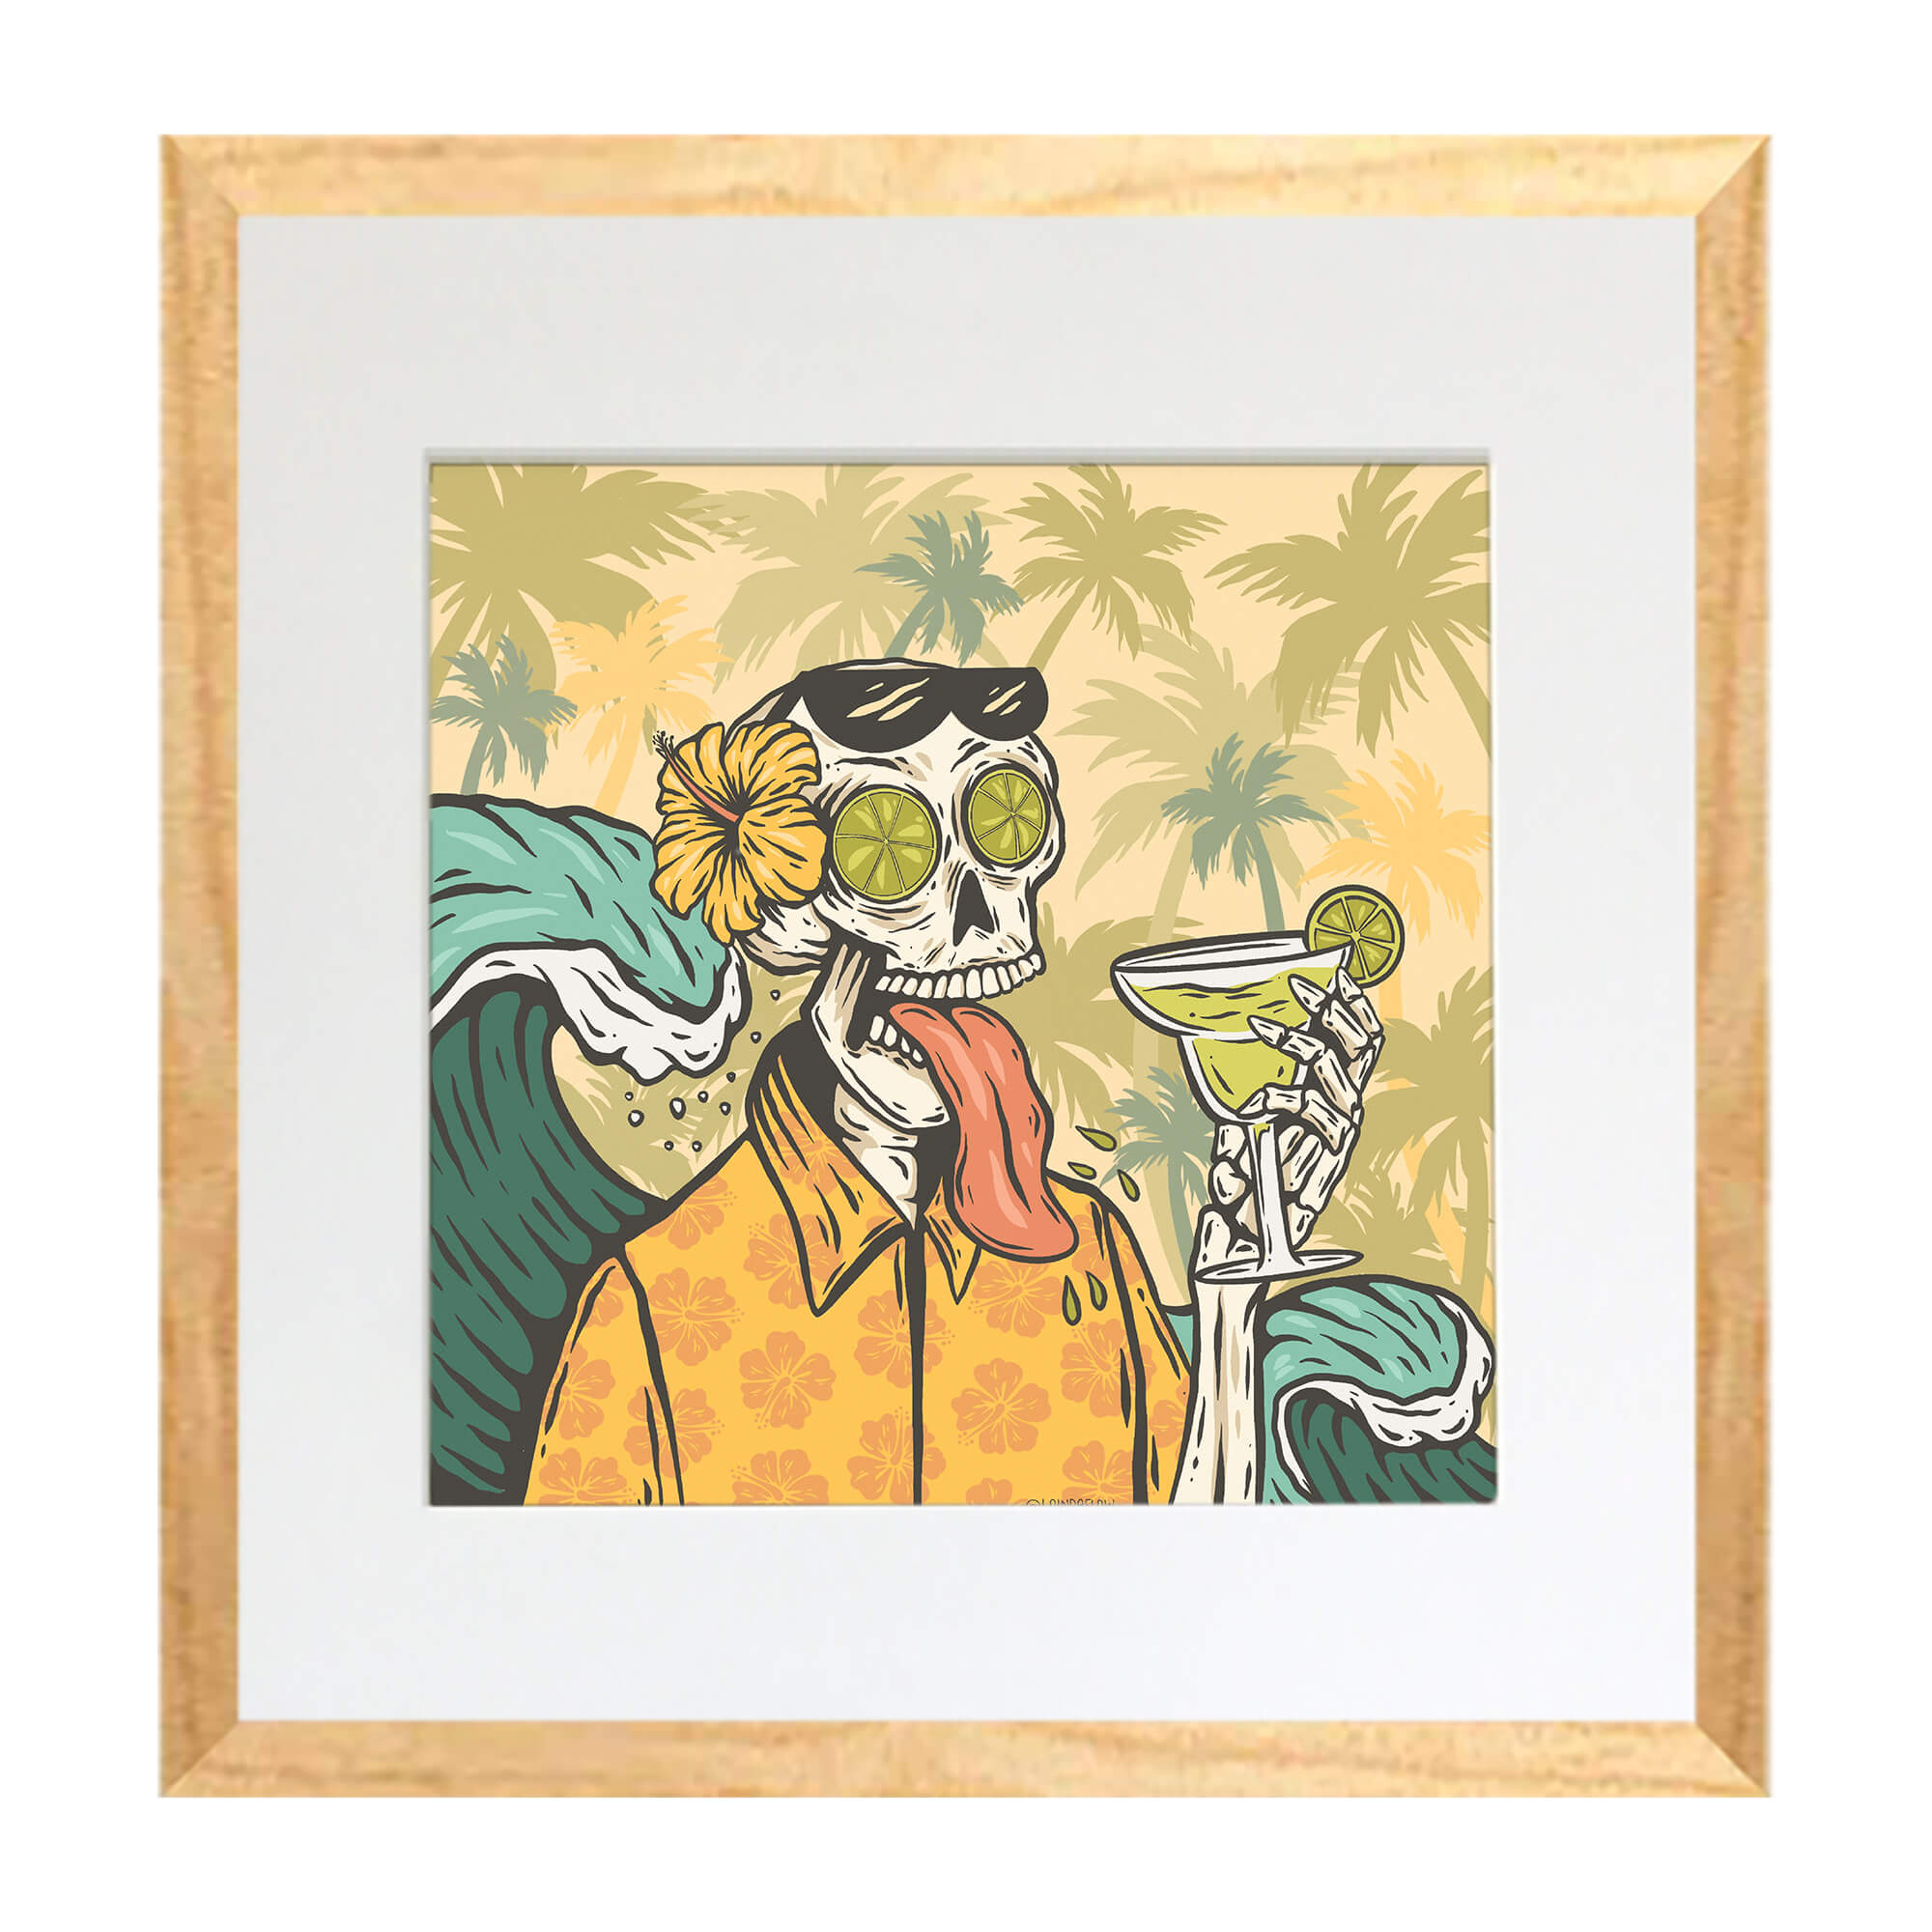 Matted art print with wood frame featuring a skeleton with large waves and coconut trees background by Hawaii artist Laihha Organna